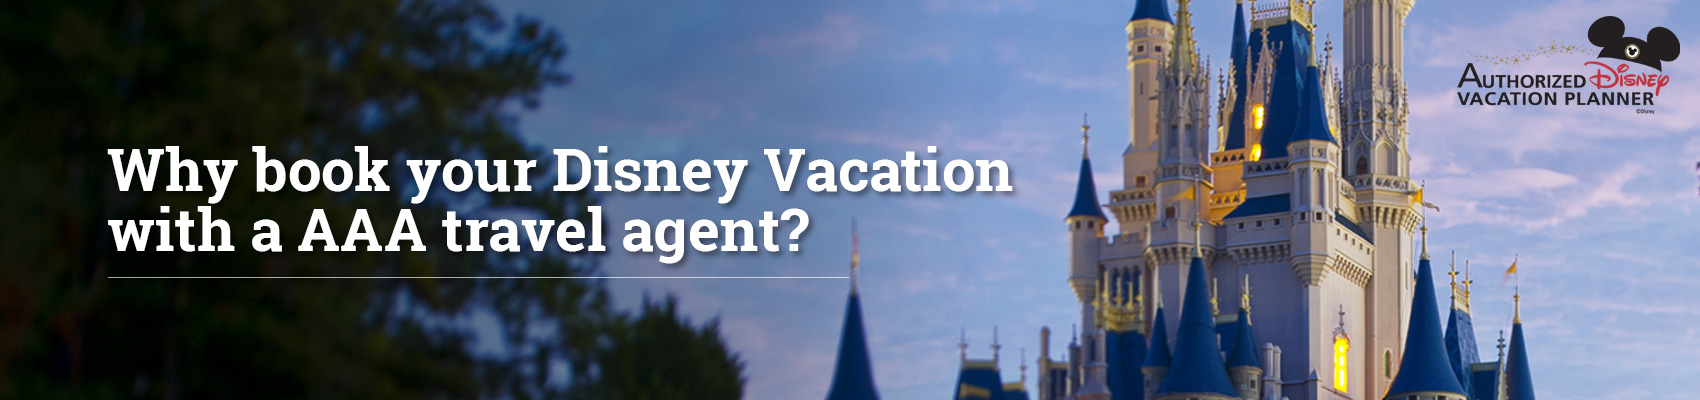 Why book your Disney Vacation with a AAA travel agent? 